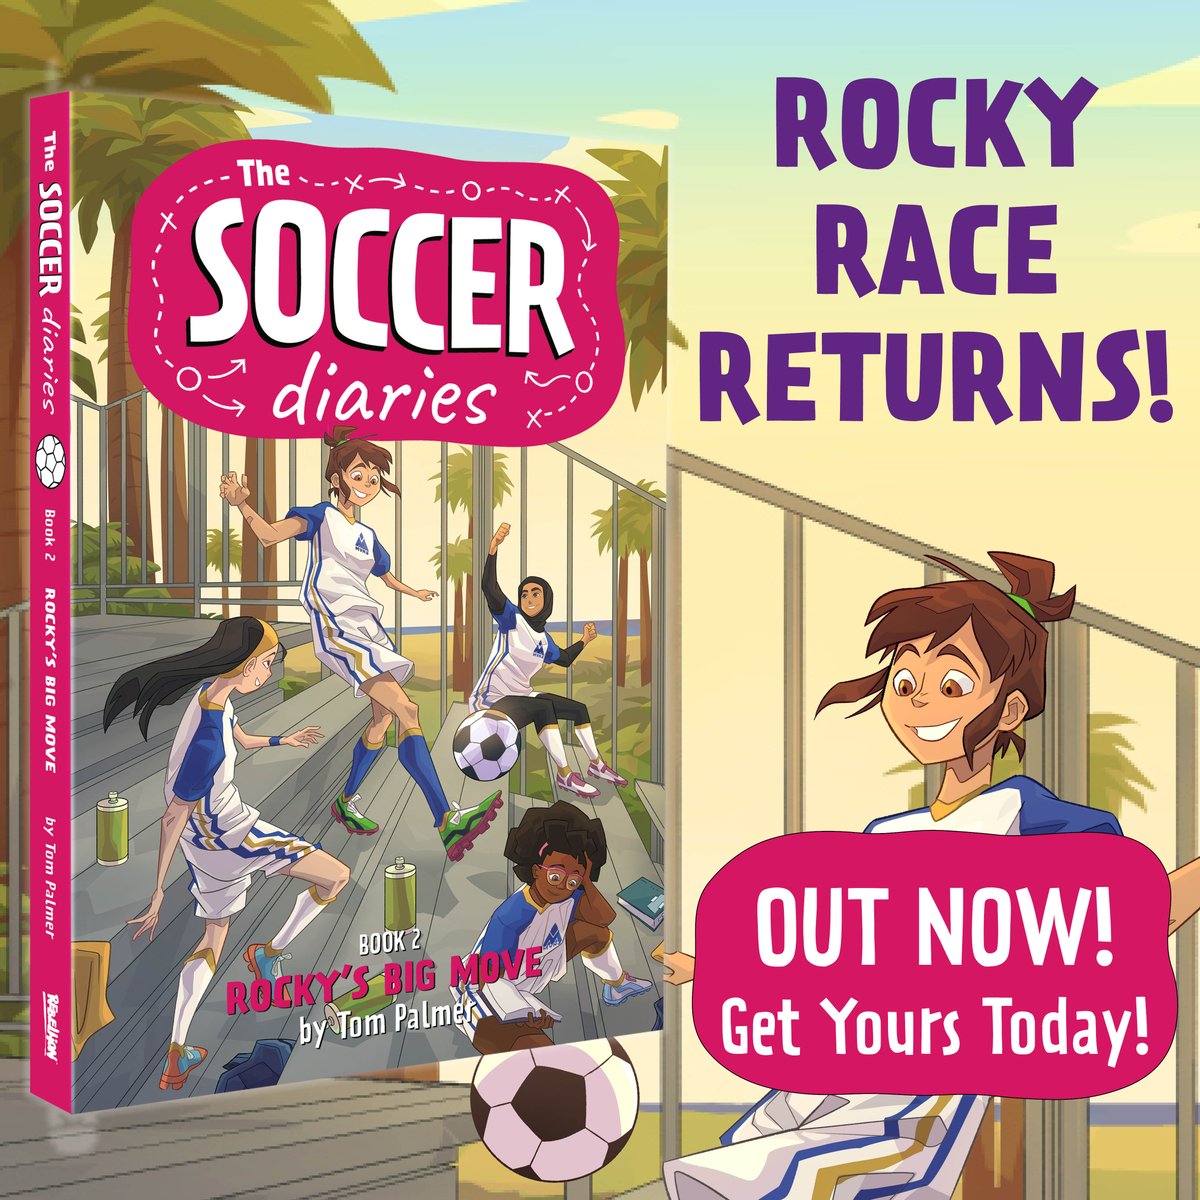 ⚽ KICK OFF! ⚽ Rocky Race returns in #TheSoccerDiaries Book Two - OUT TODAY! Be sure to pick up the next exciting book in the series for your young reader! Order yours now: reb.to/SoccerDiaries2